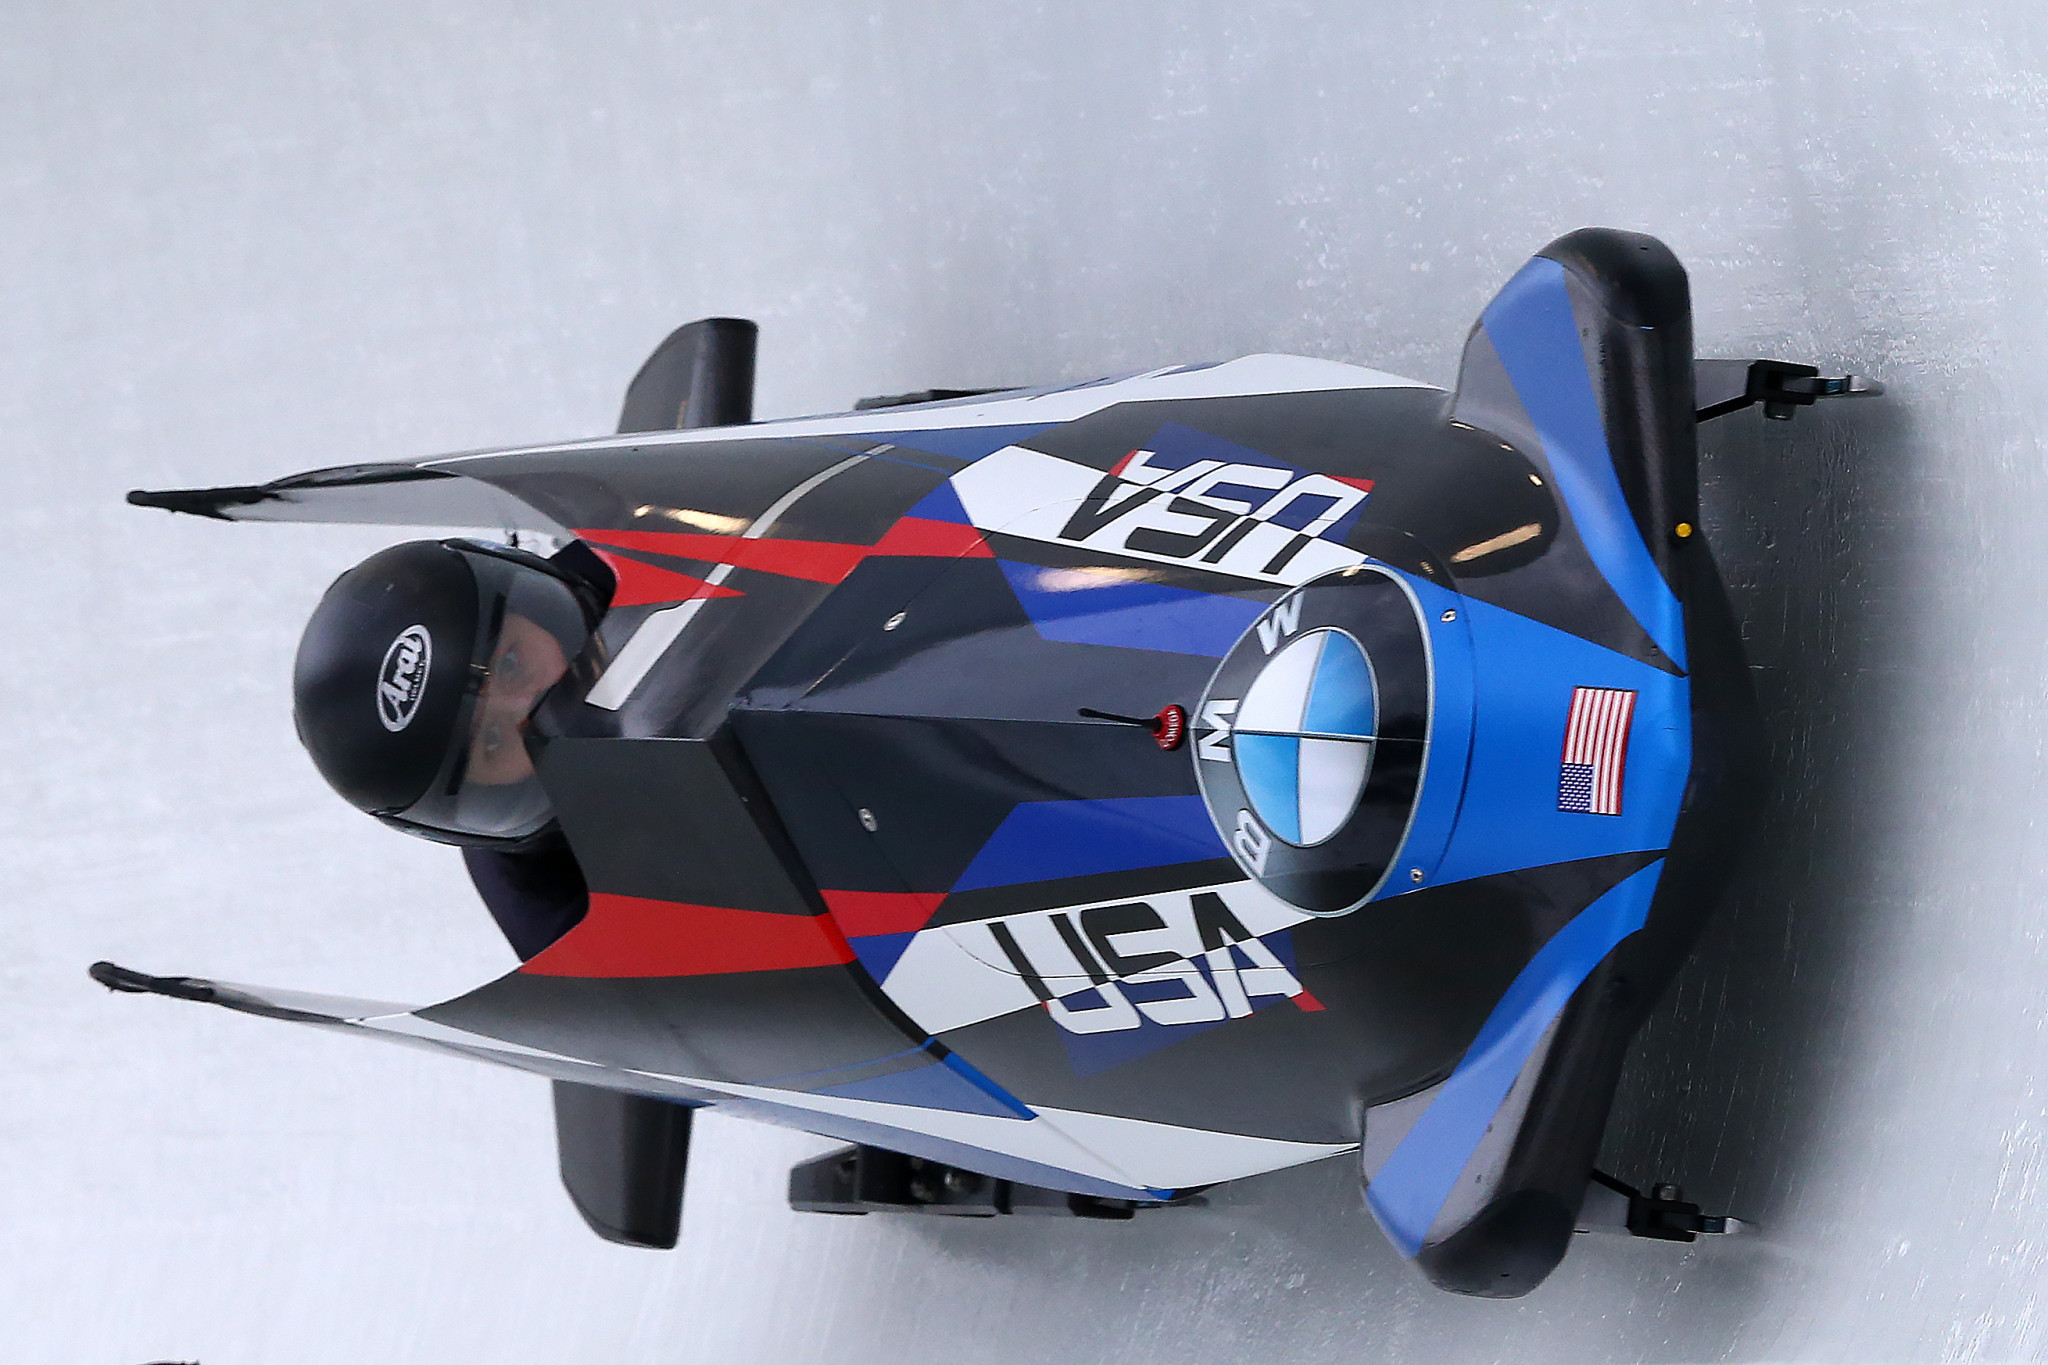 Vogt wins national title then retires from bobsleigh